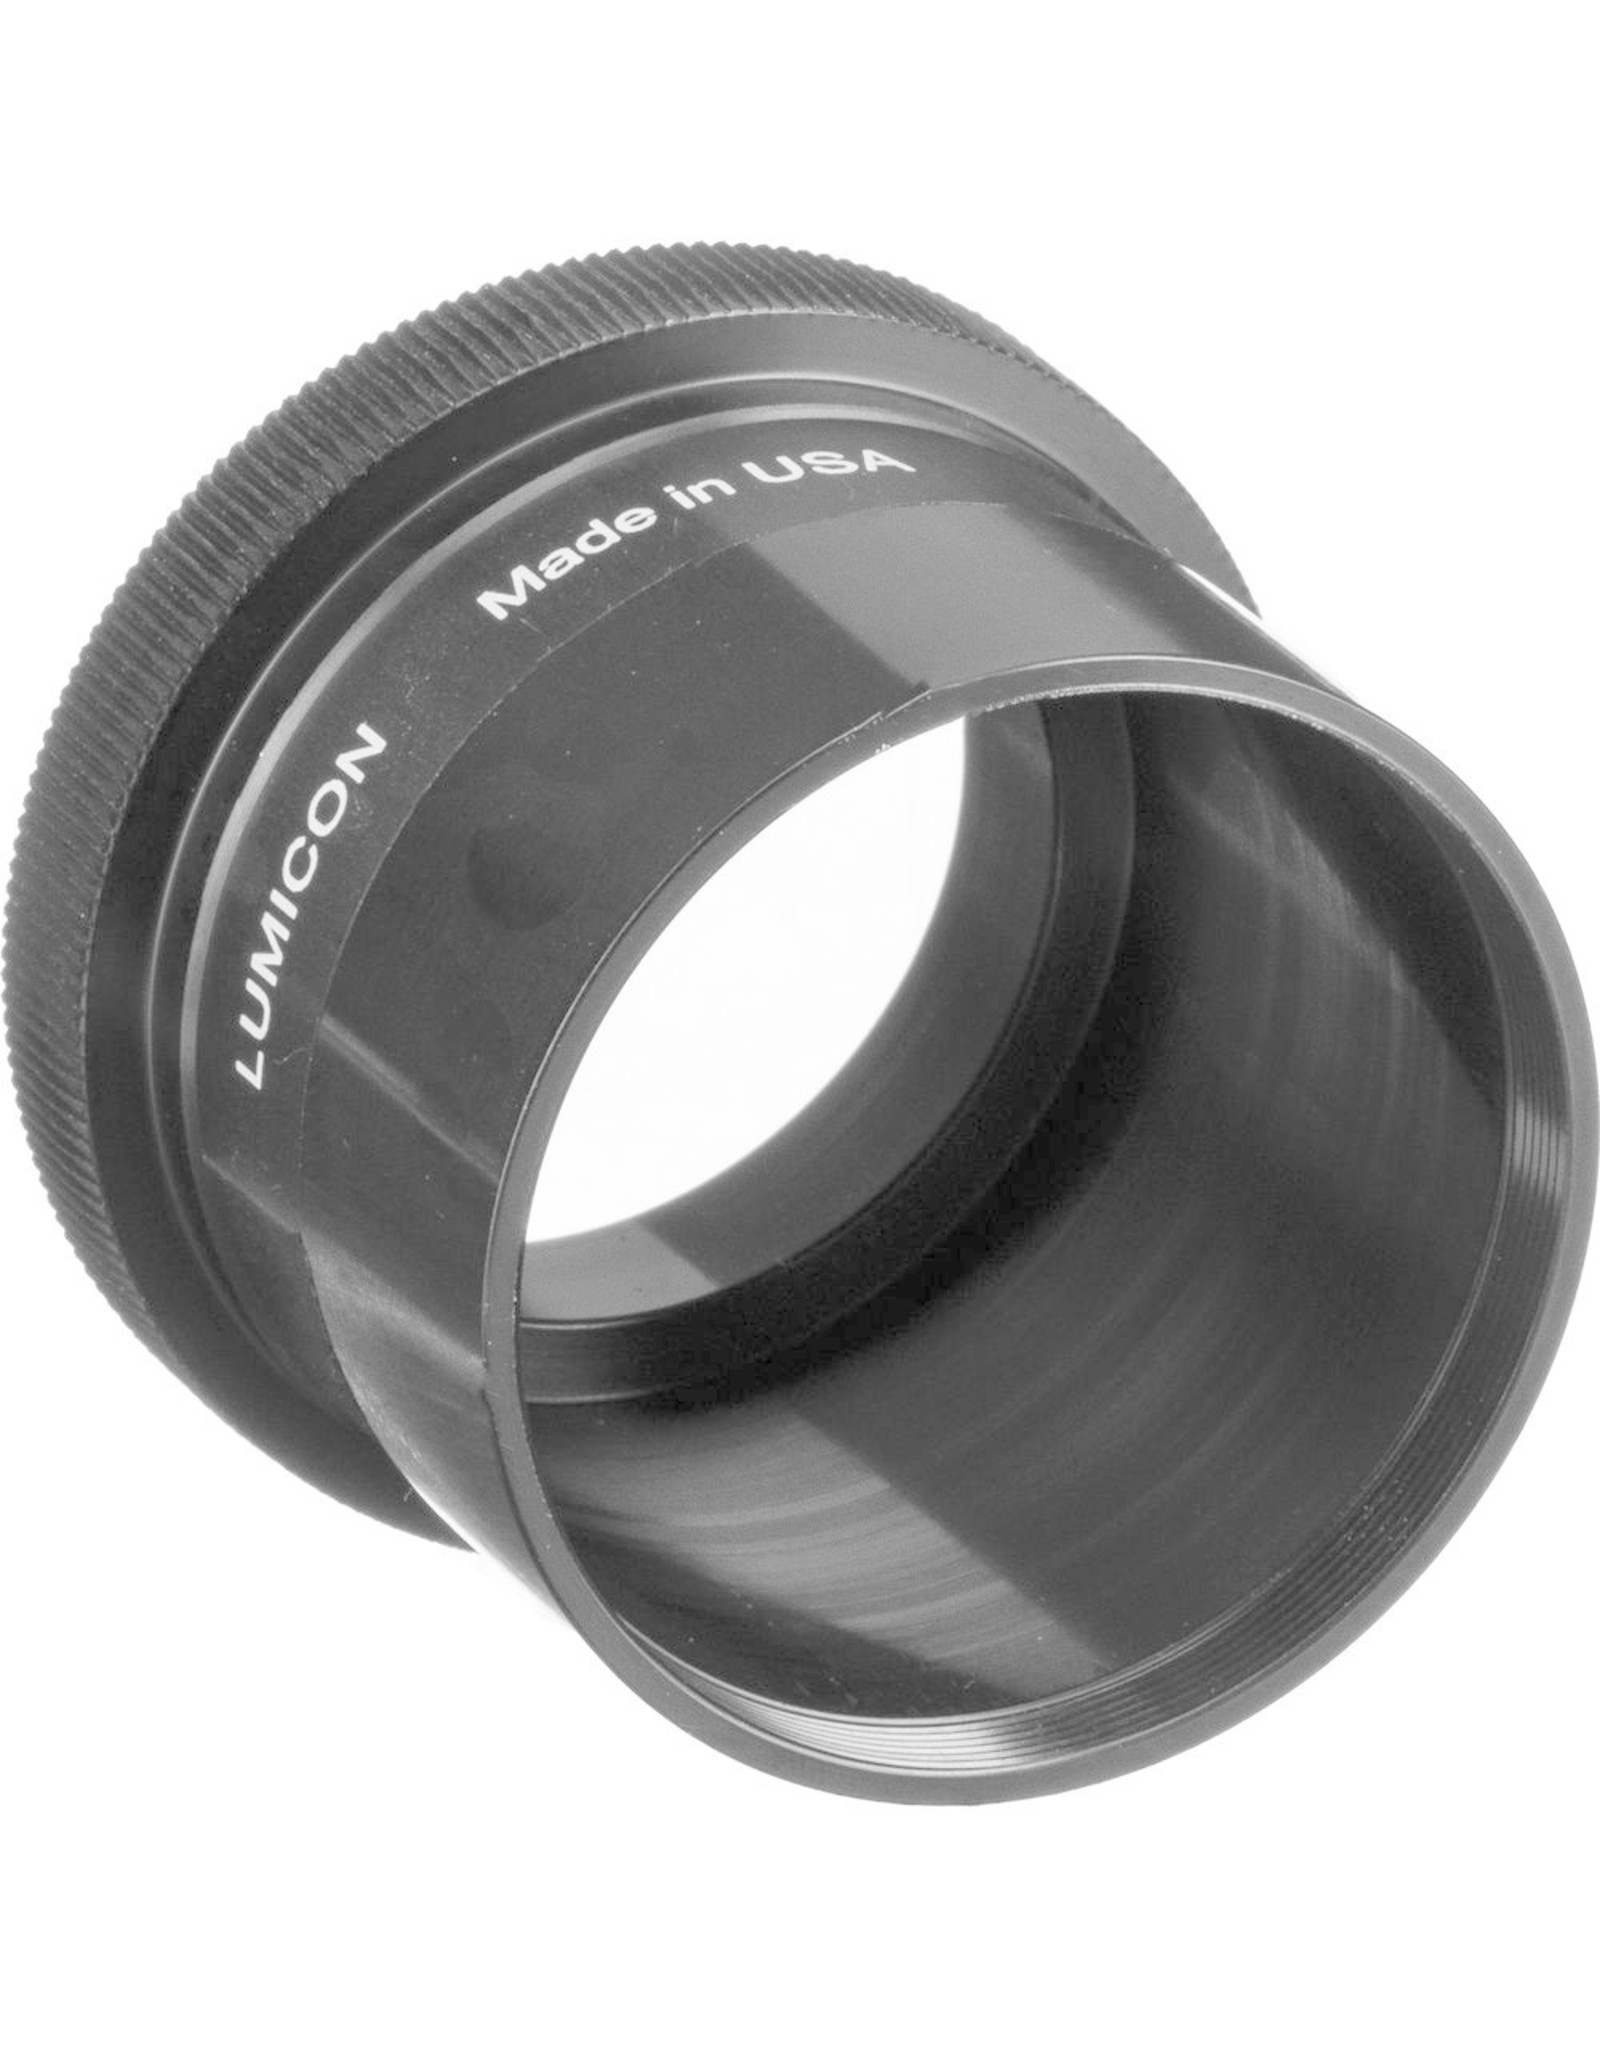 Lumicon Lumicon 2" Prime Focus Direct Camera Adapter with Nikon AF Mount